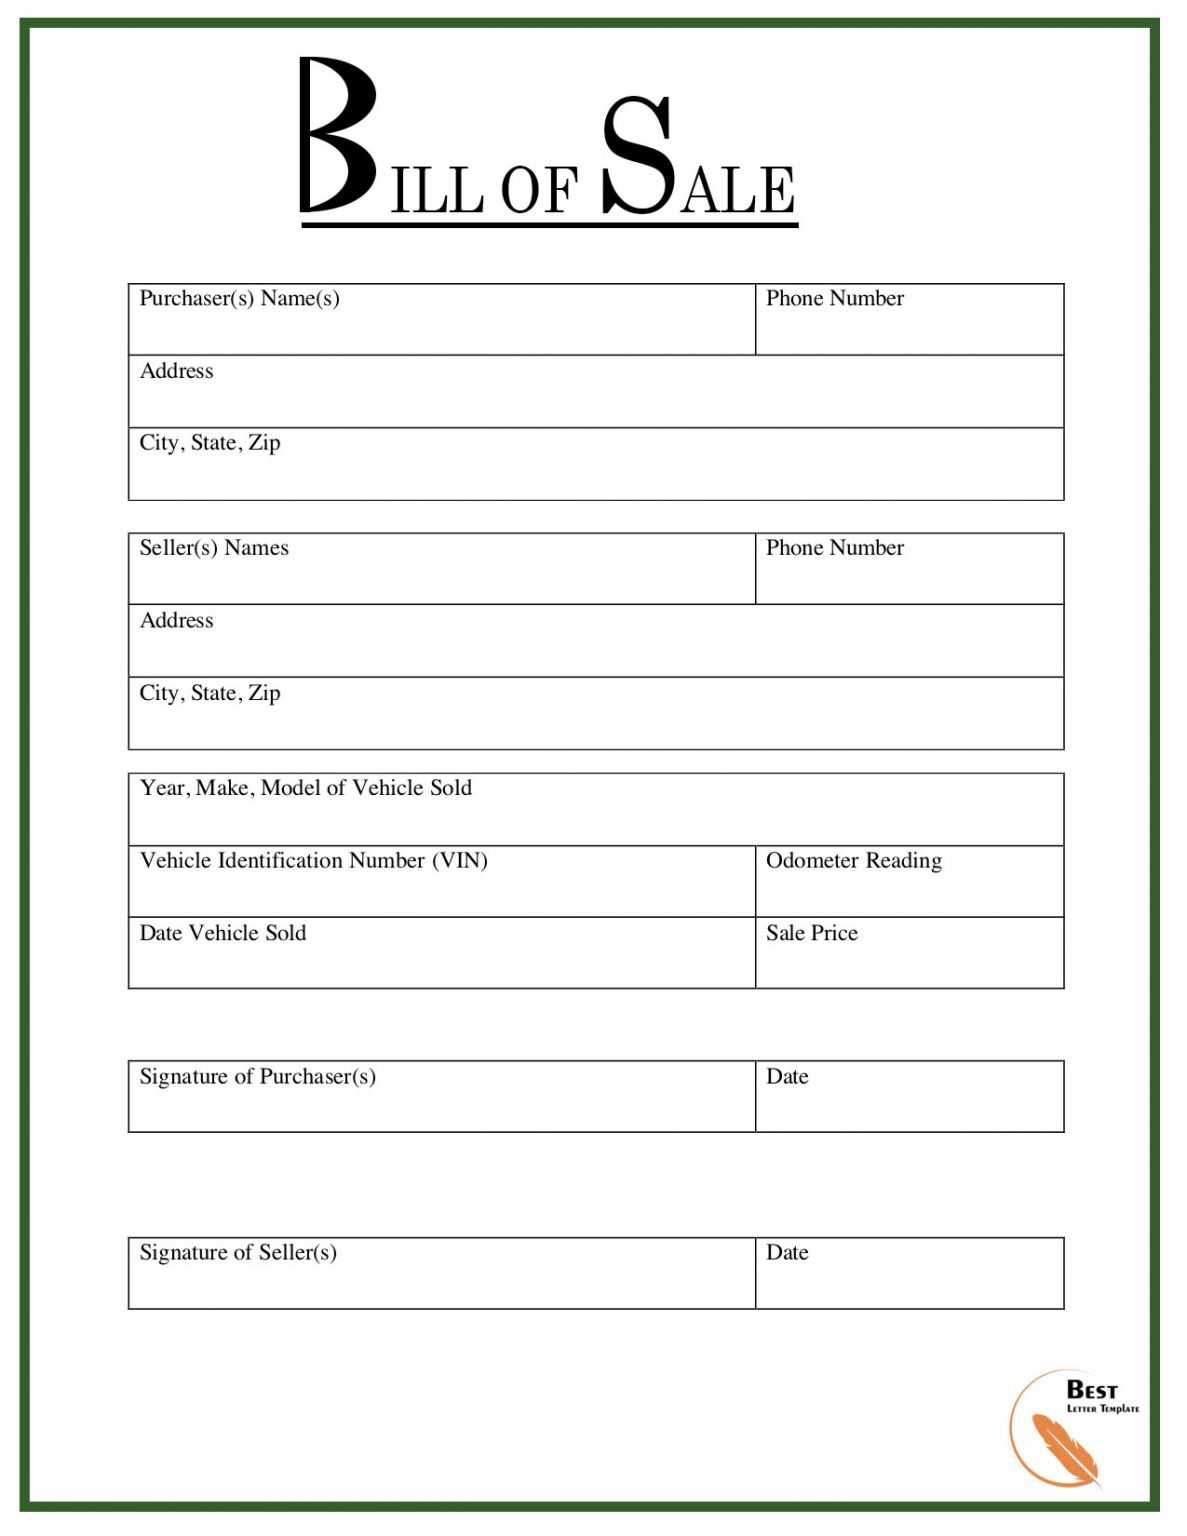 does-a-bill-of-sale-in-texas-need-to-be-notarized-printable-form